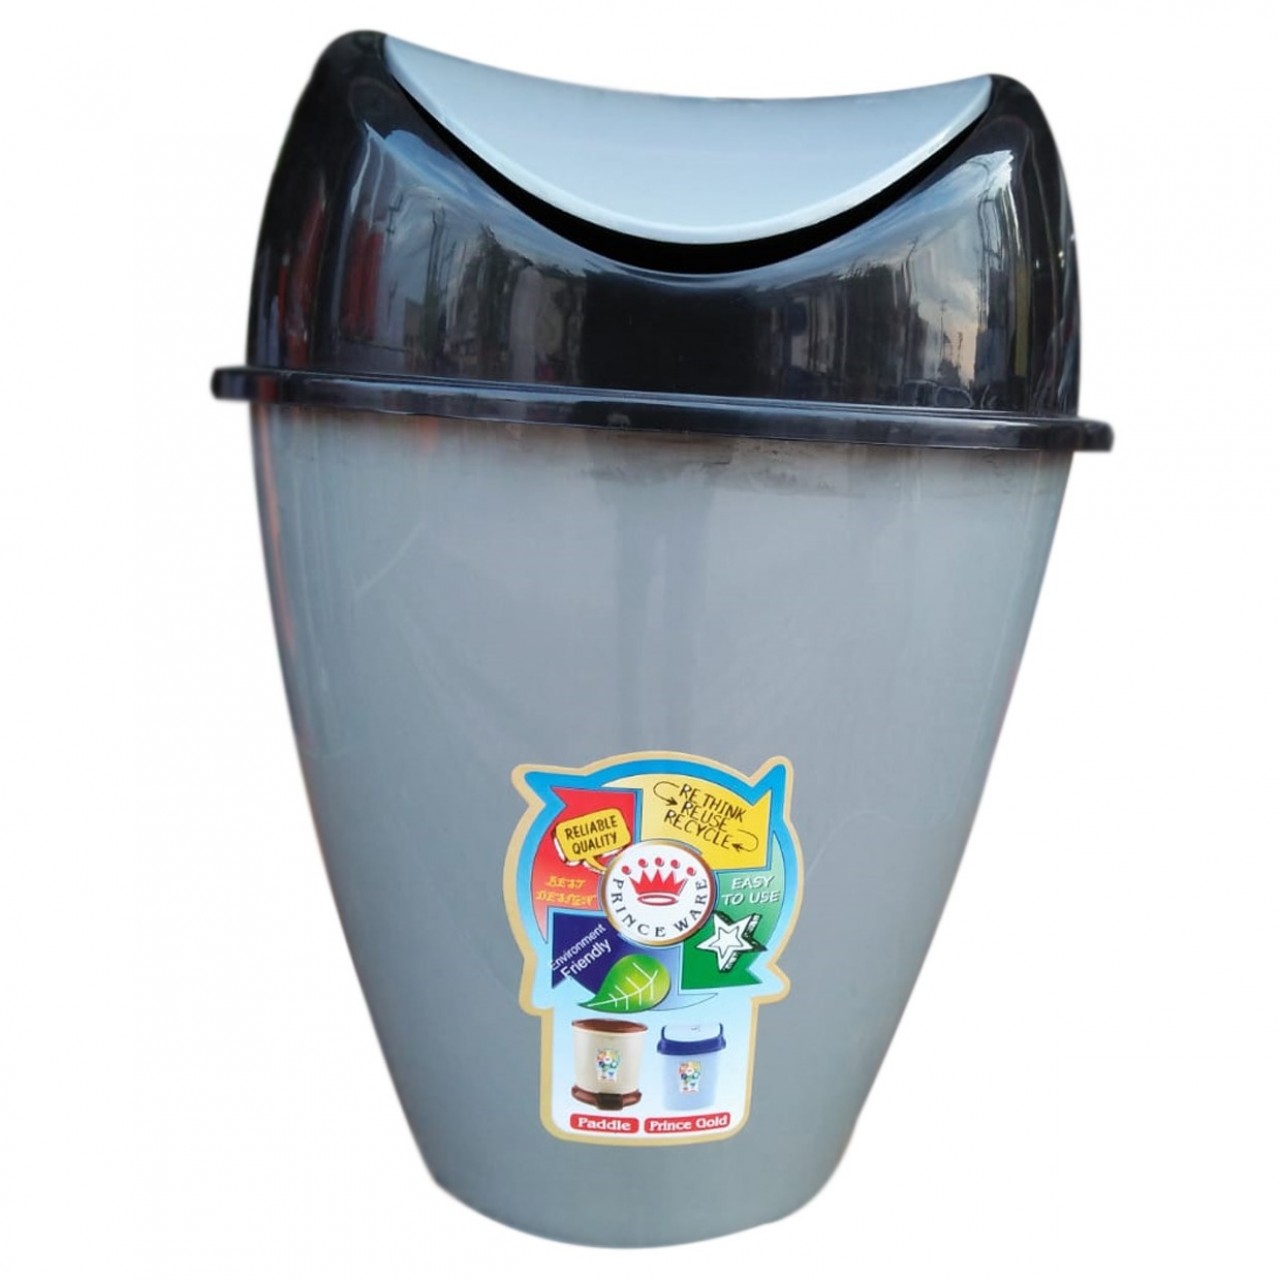 Plastic Garbage Dustbin With Swing Lid For Home & Office Use